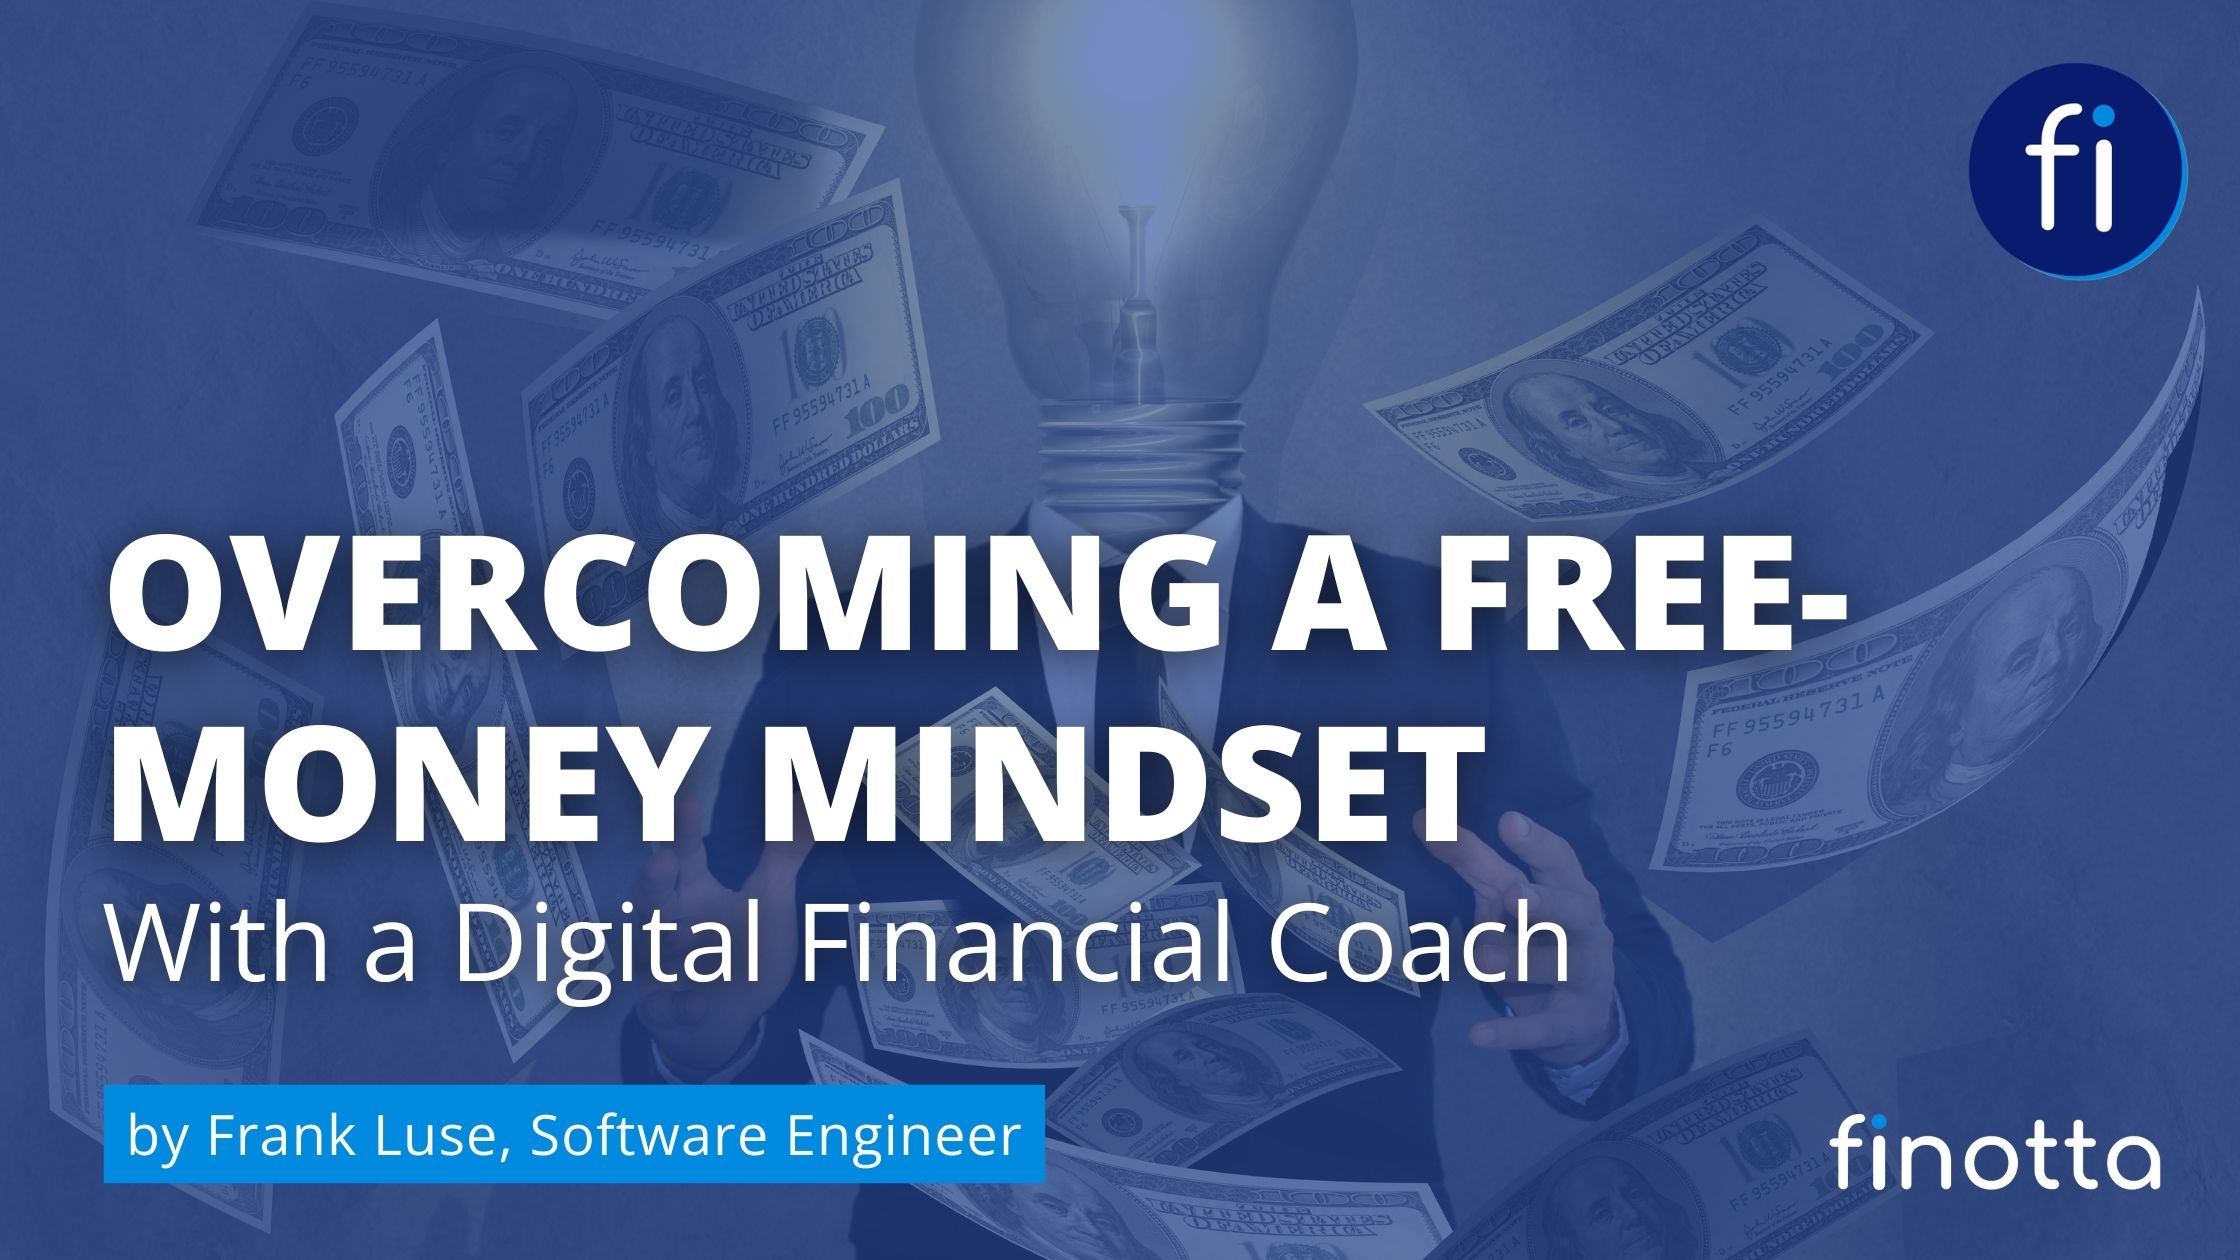 Overcoming a Free-Money Mindset With a Digital Financial Coach